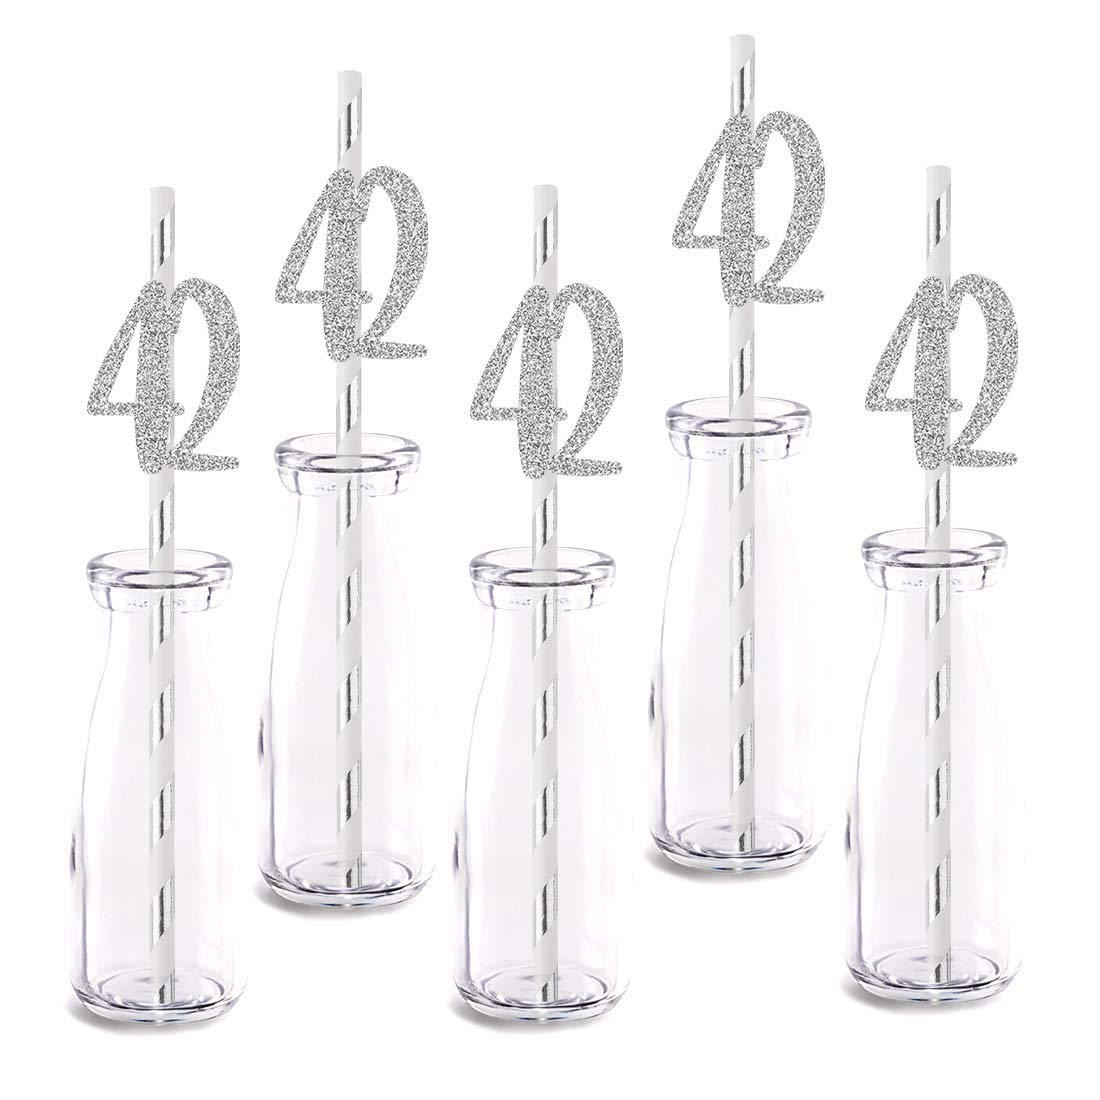 Silver Happy 42nd Birthday Straw Decor, Silver Glitter 24pcs Cut-Out Number 42 Party Drinking Decorative Straws, Supplies